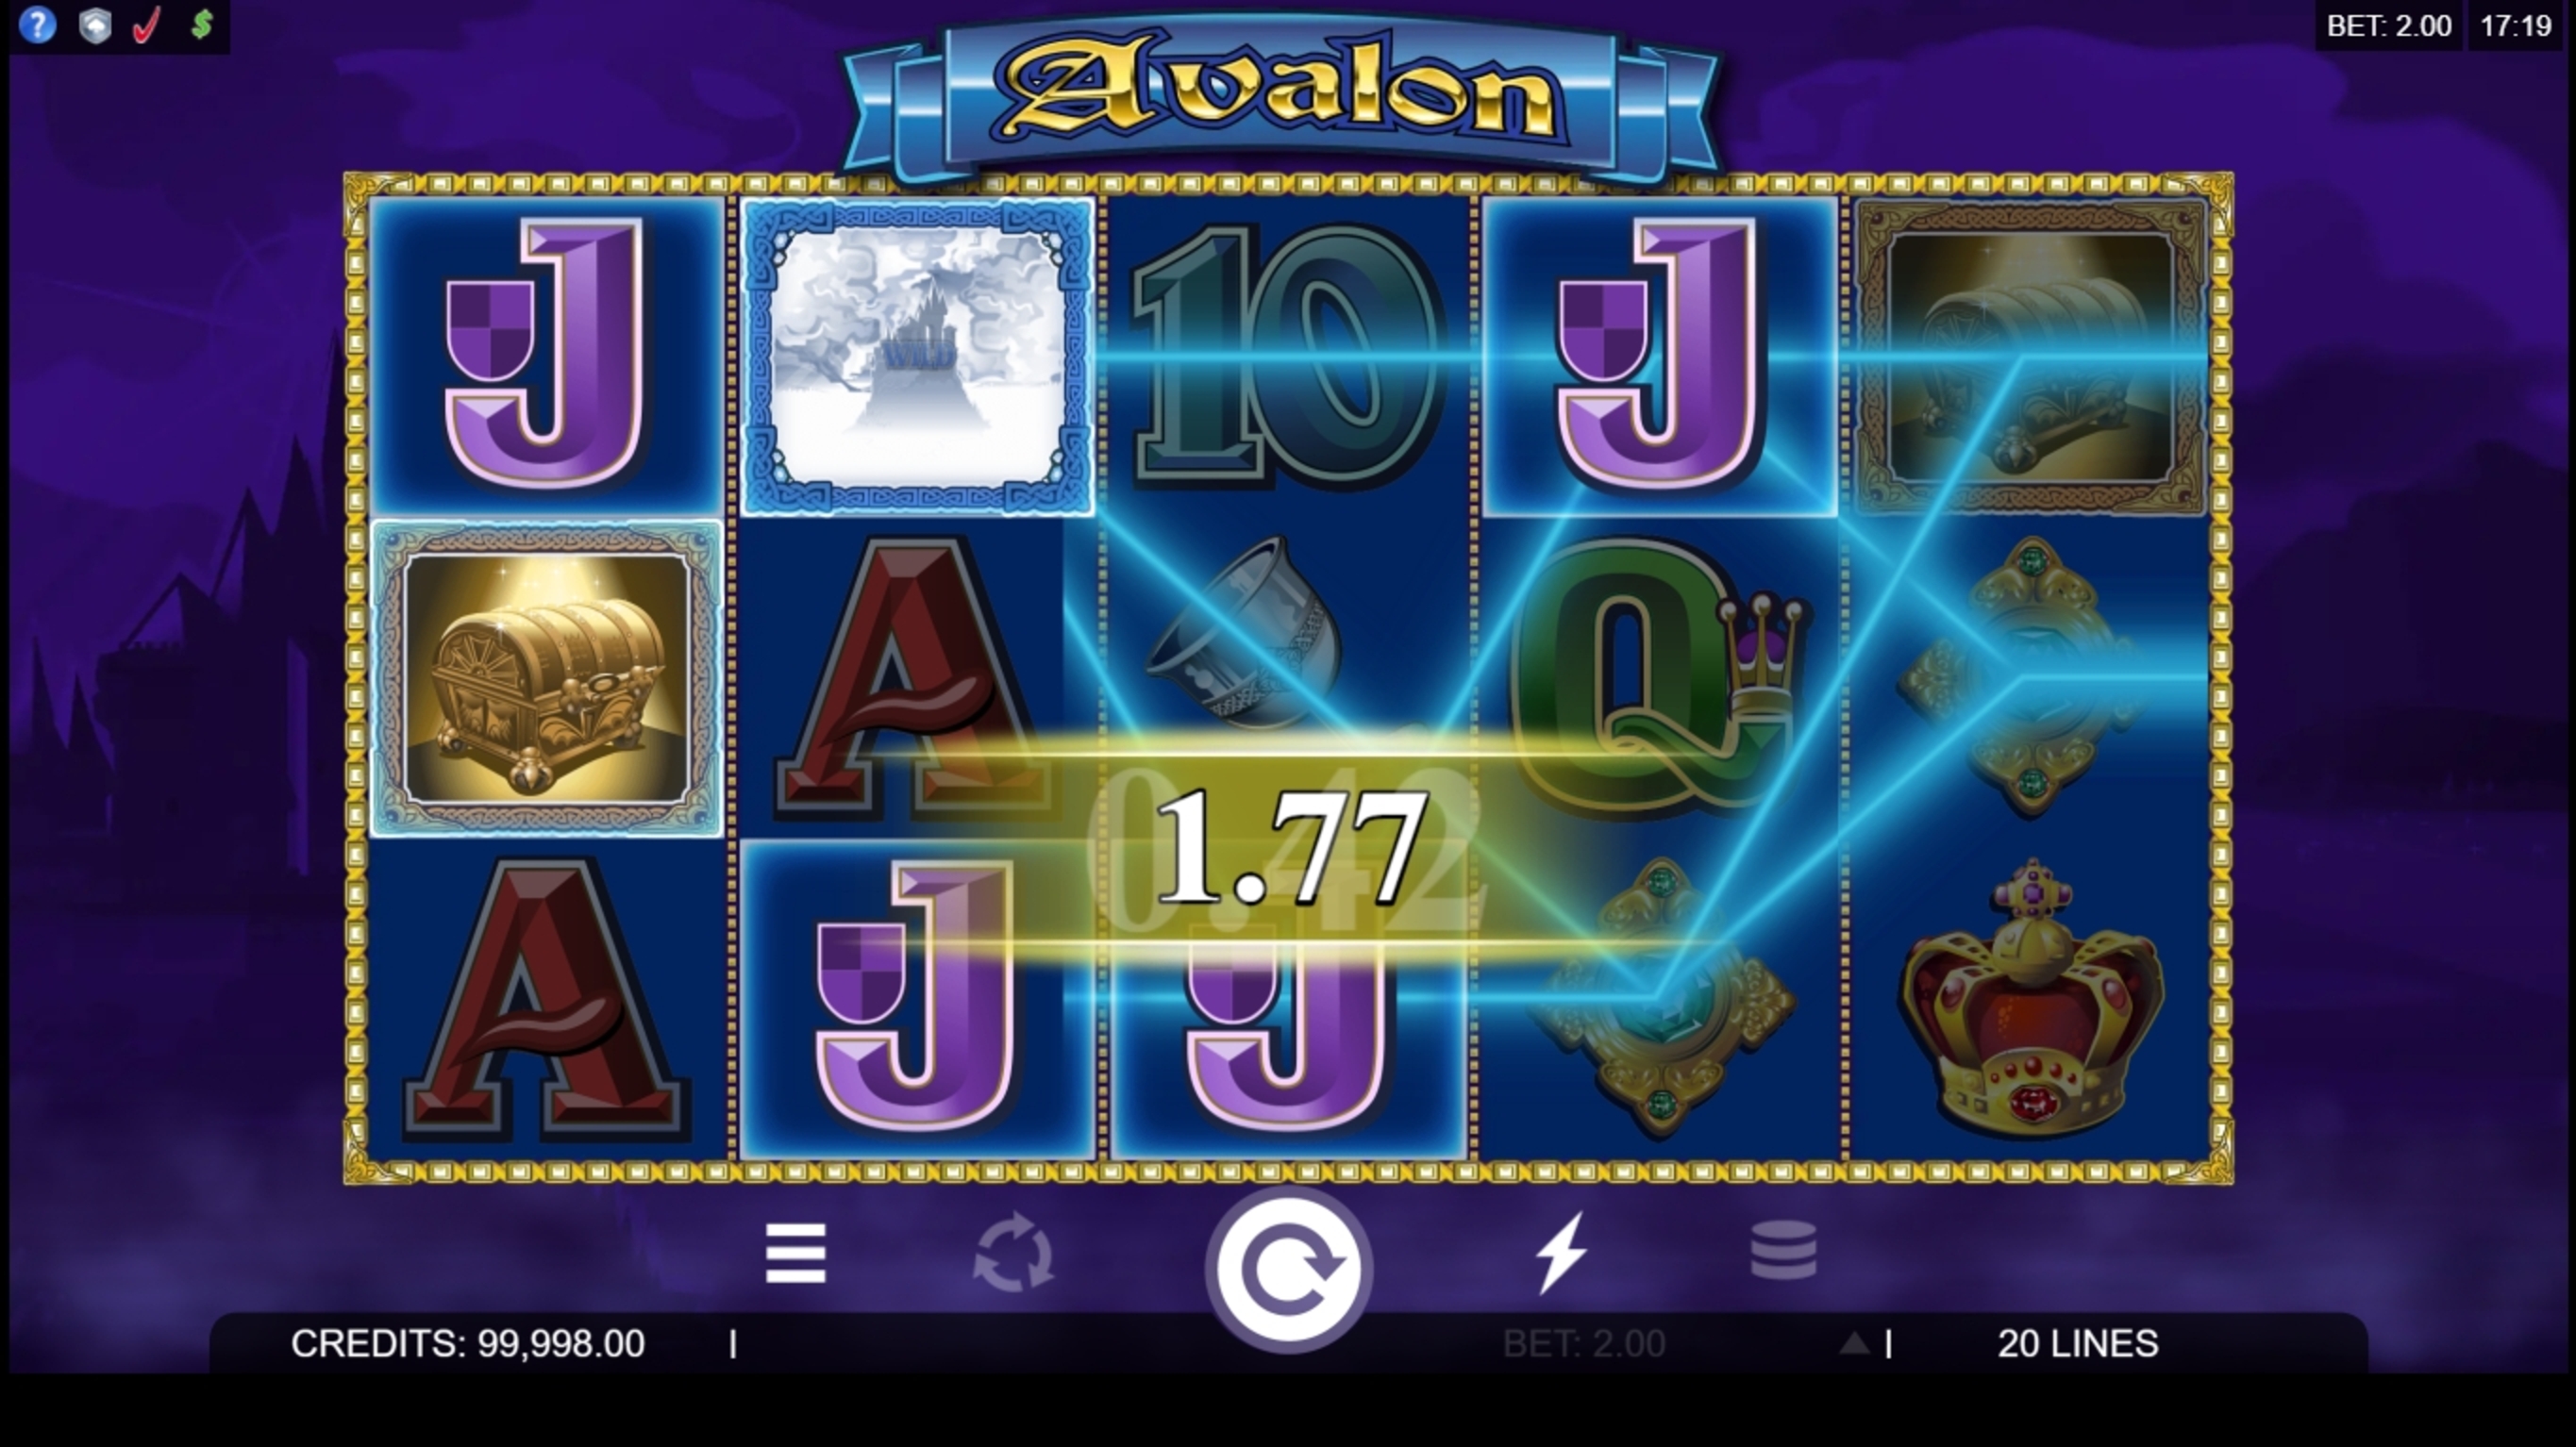 Win Money in Avalon Free Slot Game by Microgaming